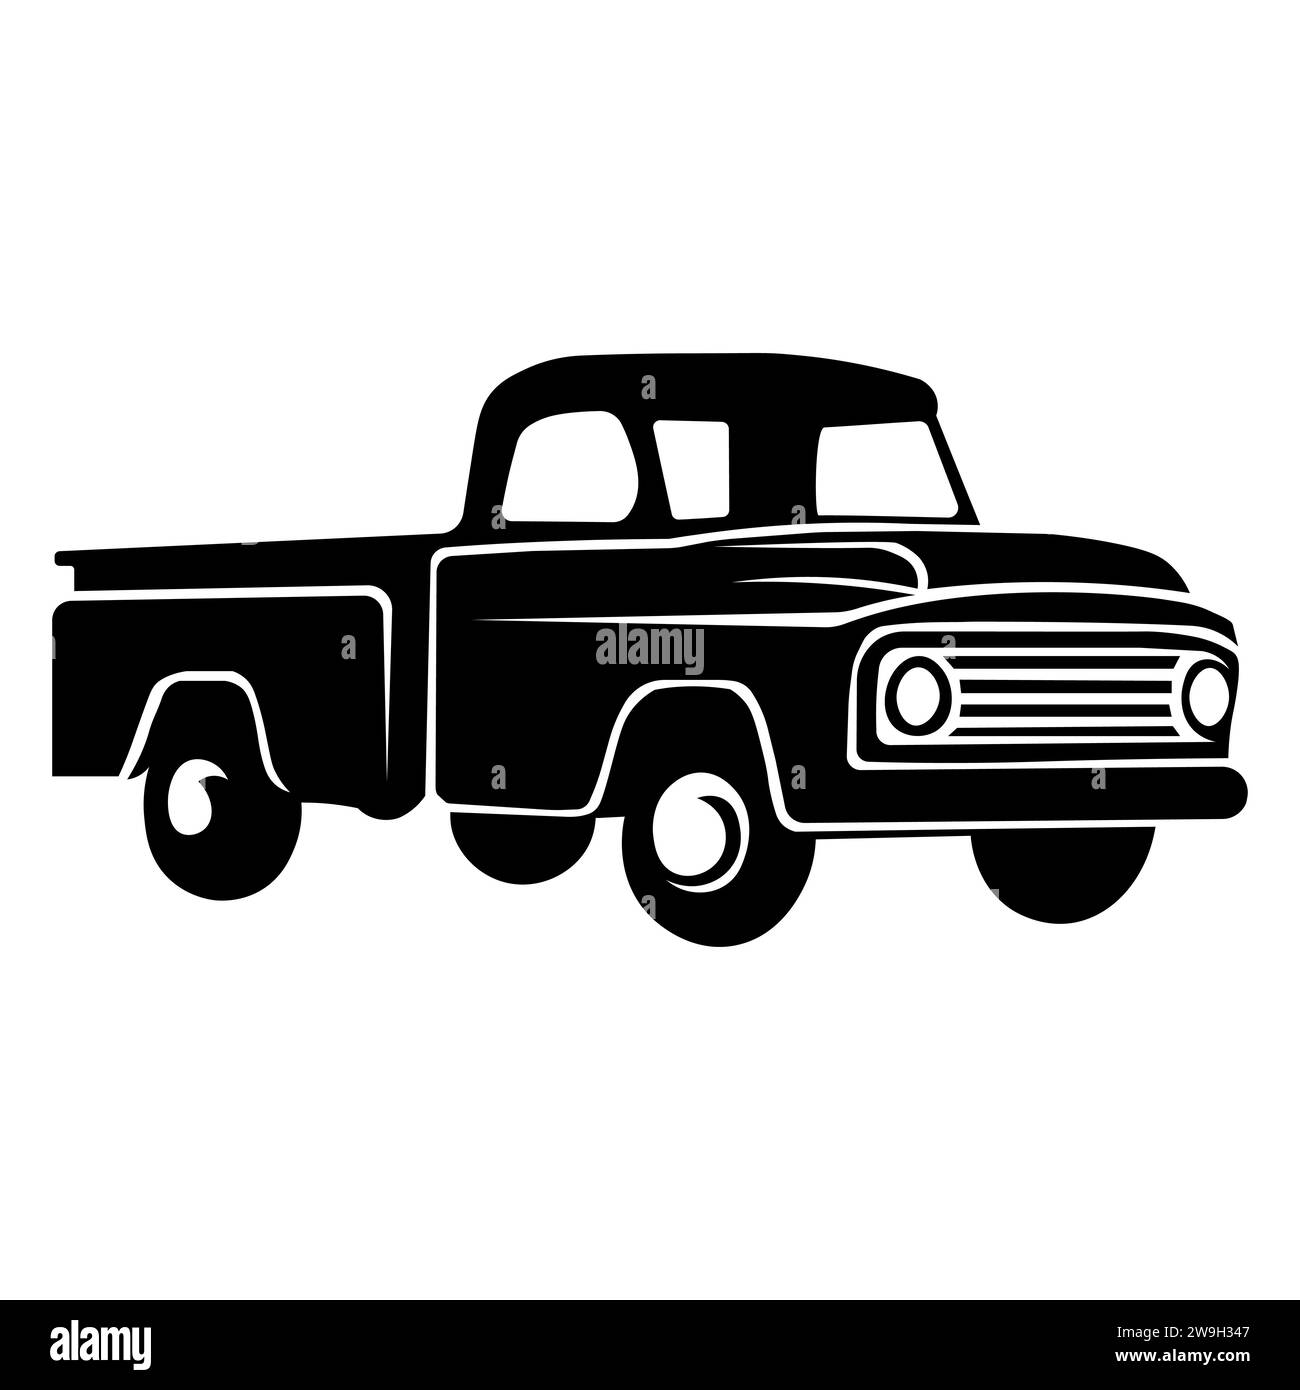 Pickup truck black vector icon on white background Stock Vector